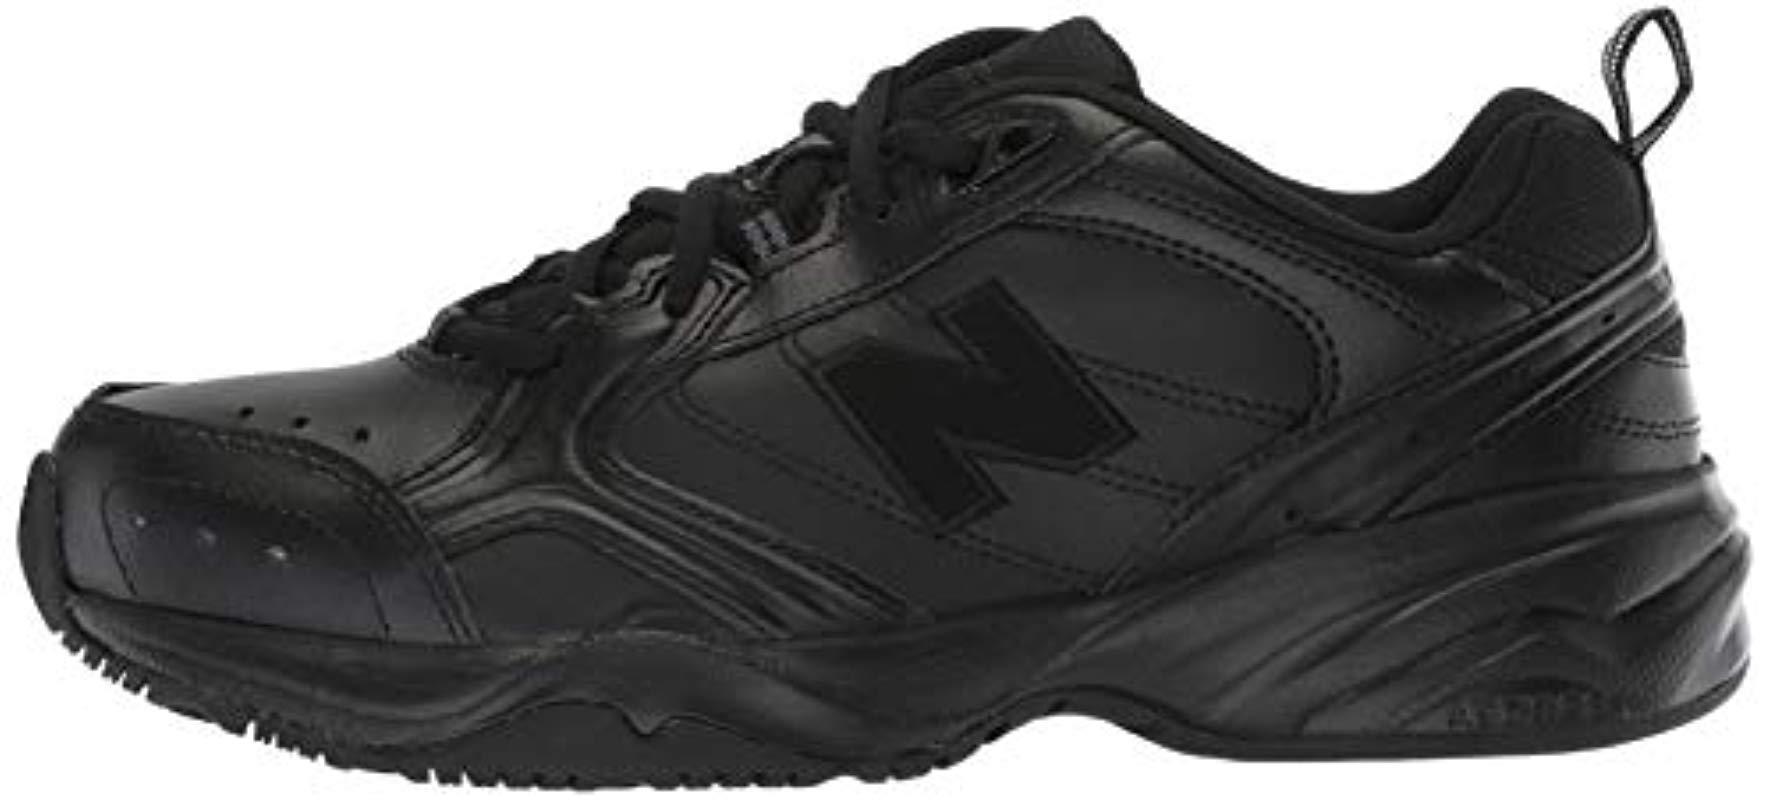 New Balance Leather 624 V2 Casual Comfort Cross Trainer in Black - Save 74%  - Lyst